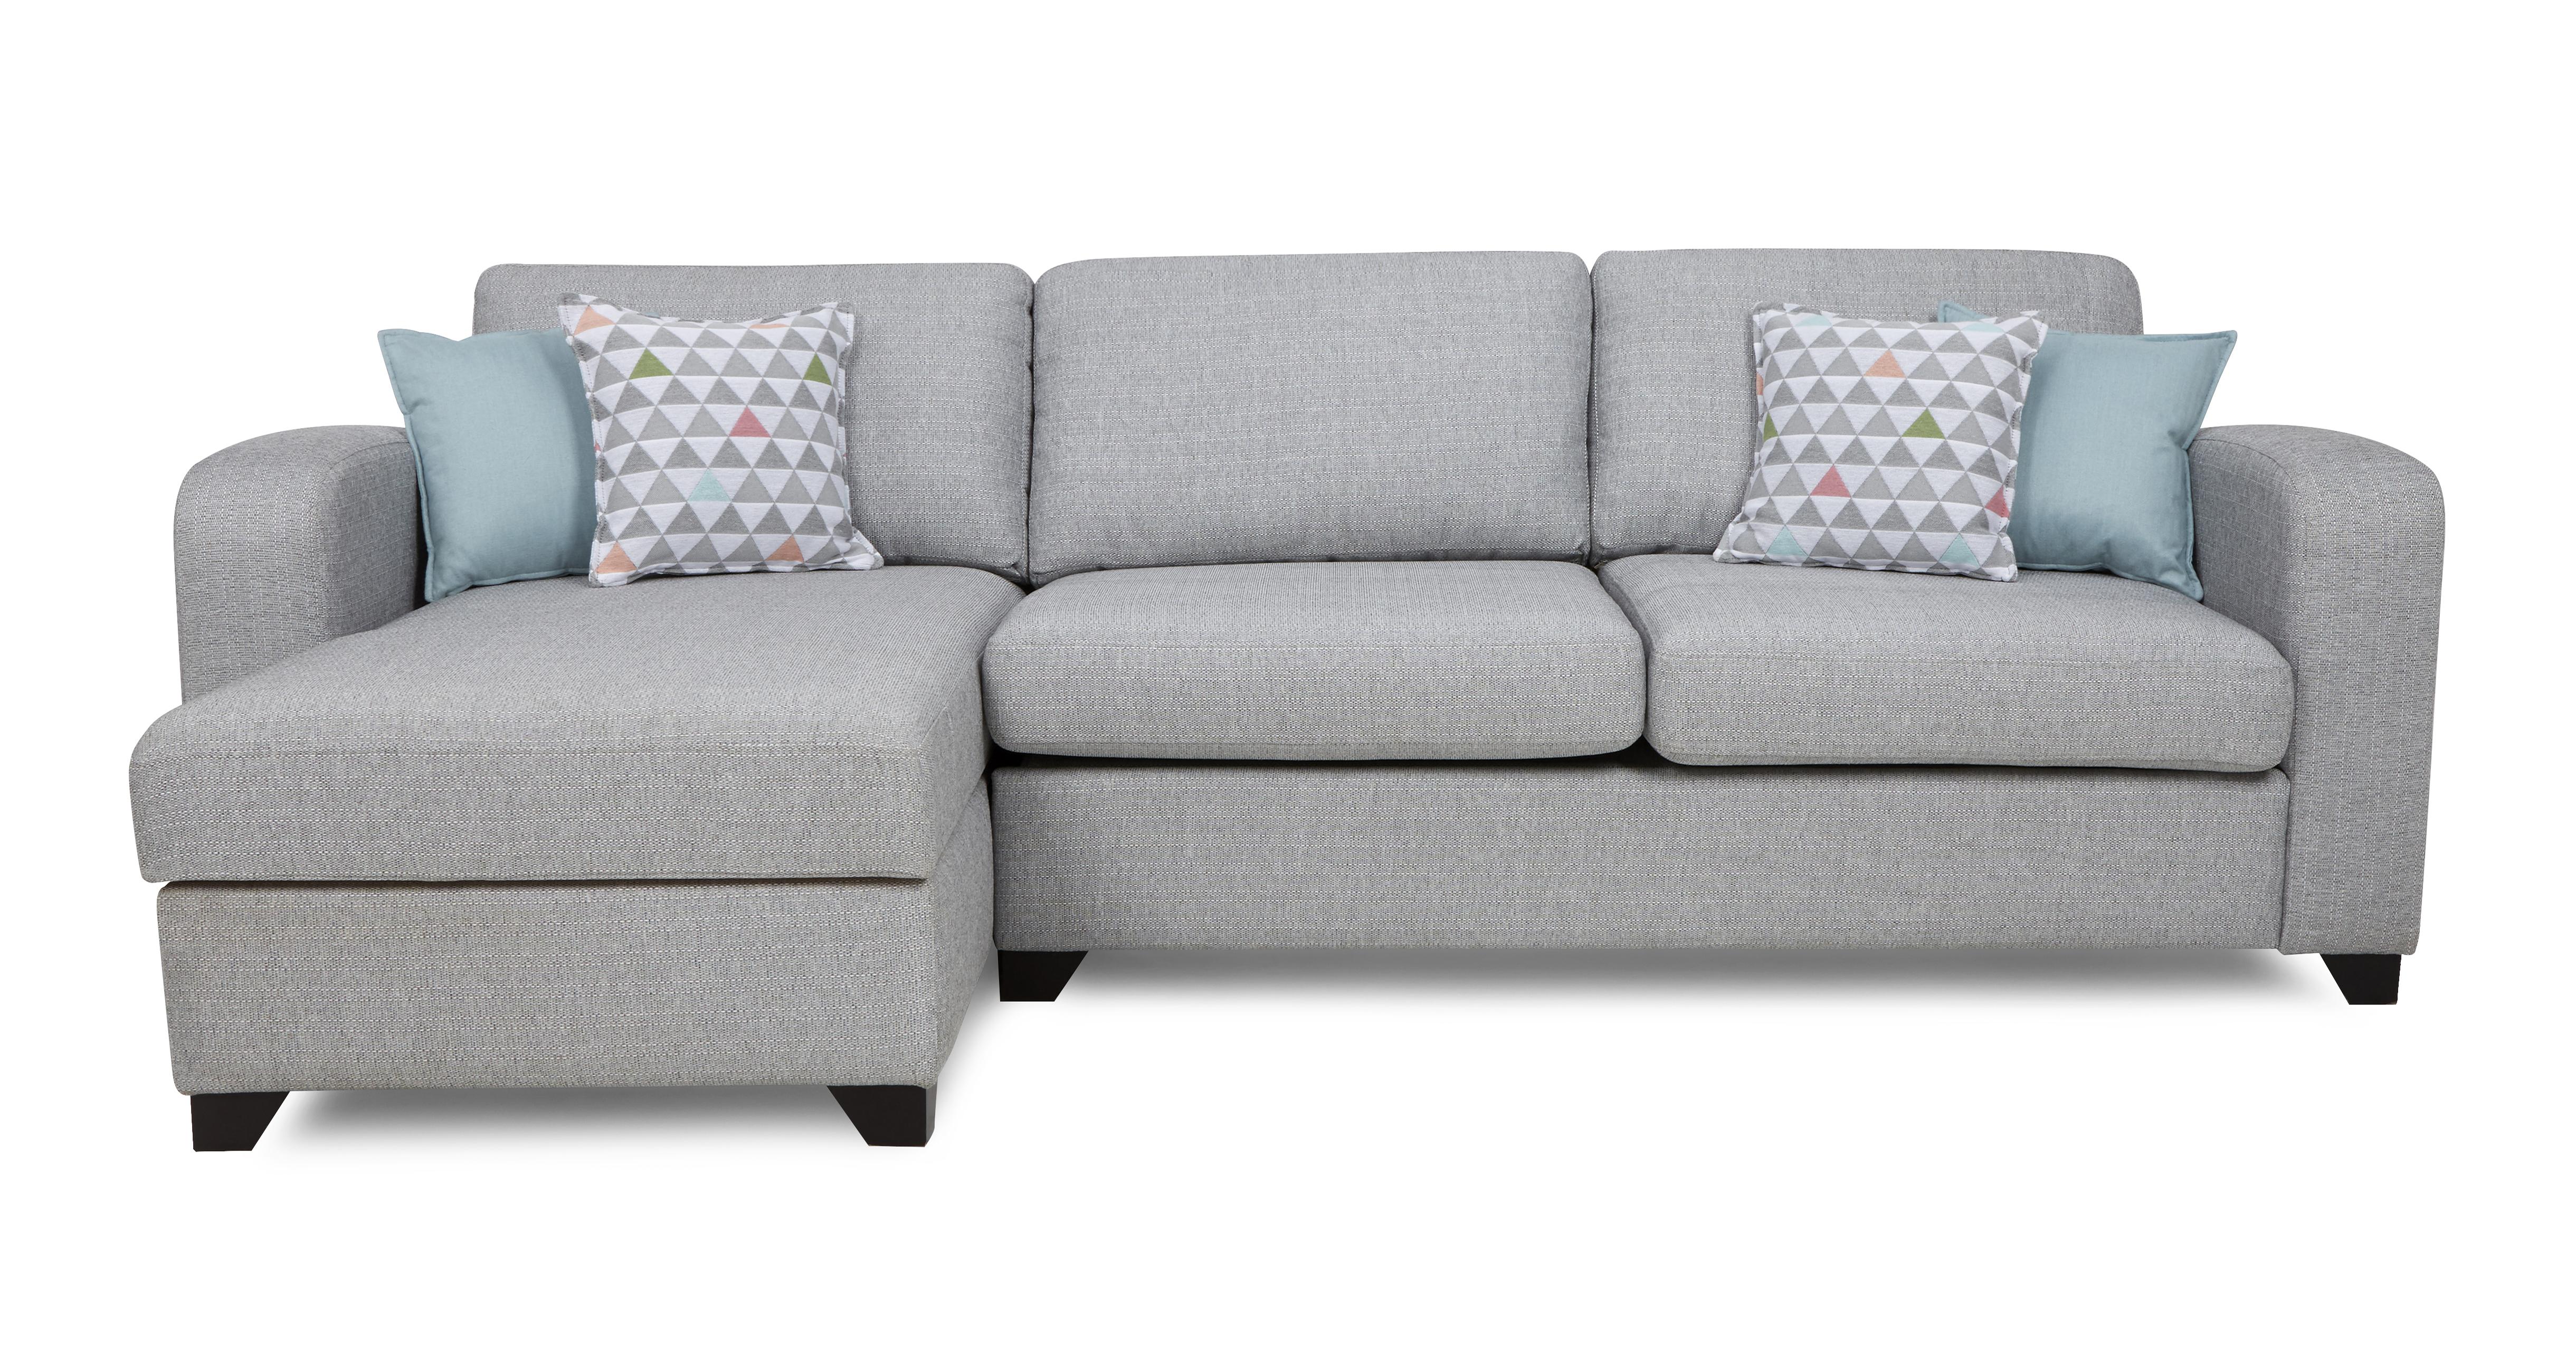 dfs lydia 3 seater sofa bed review